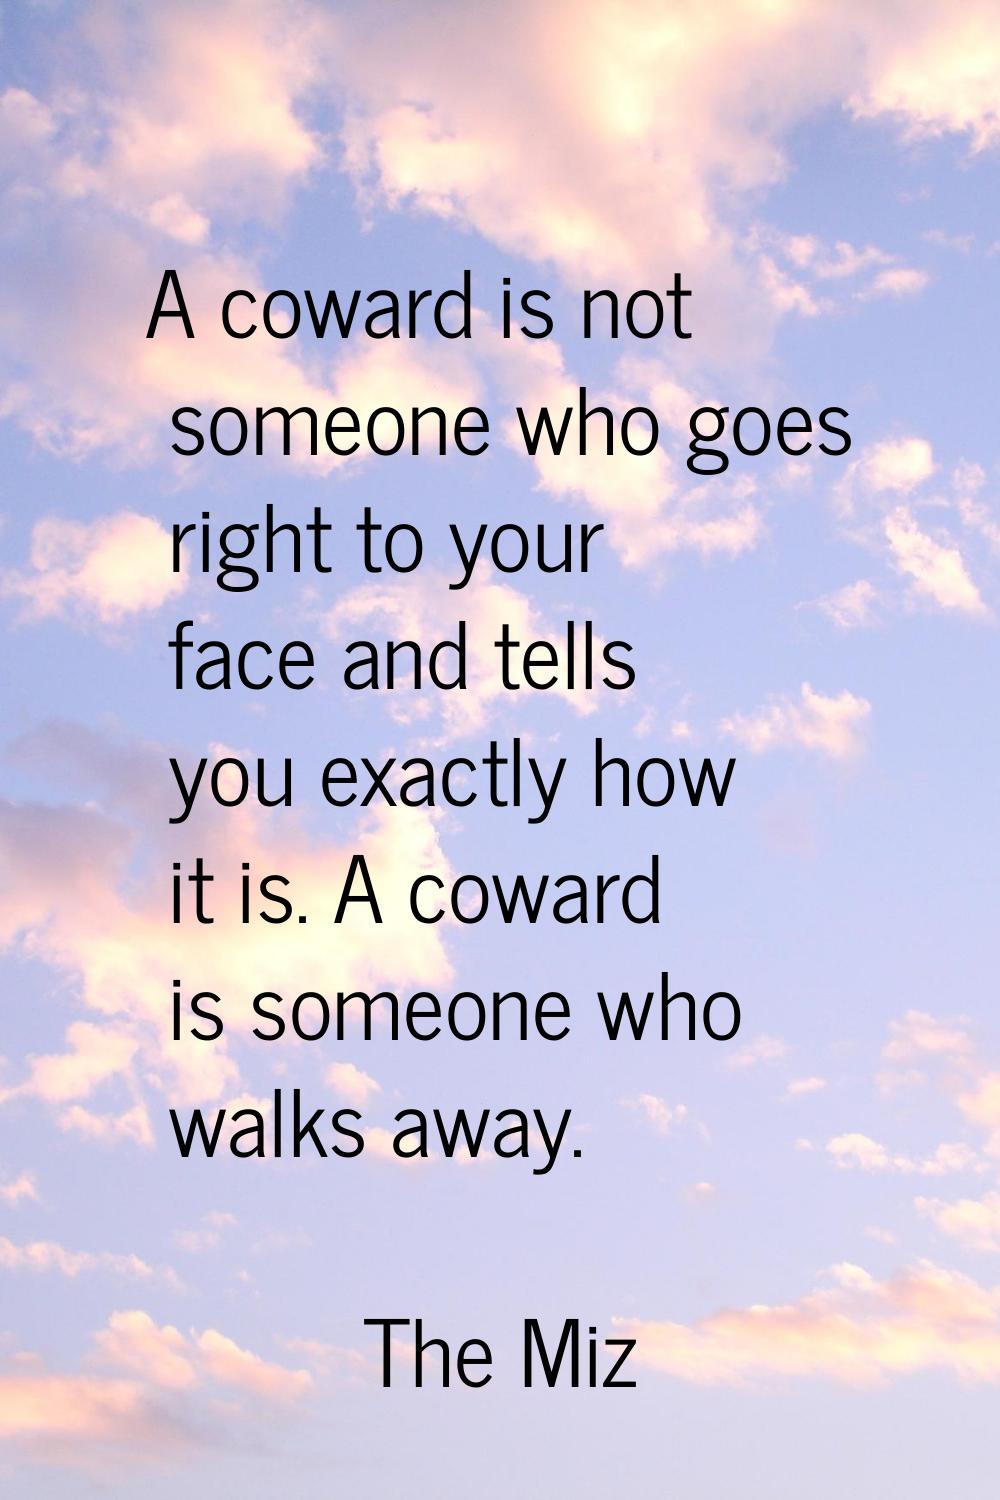 A coward is not someone who goes right to your face and tells you exactly how it is. A coward is so